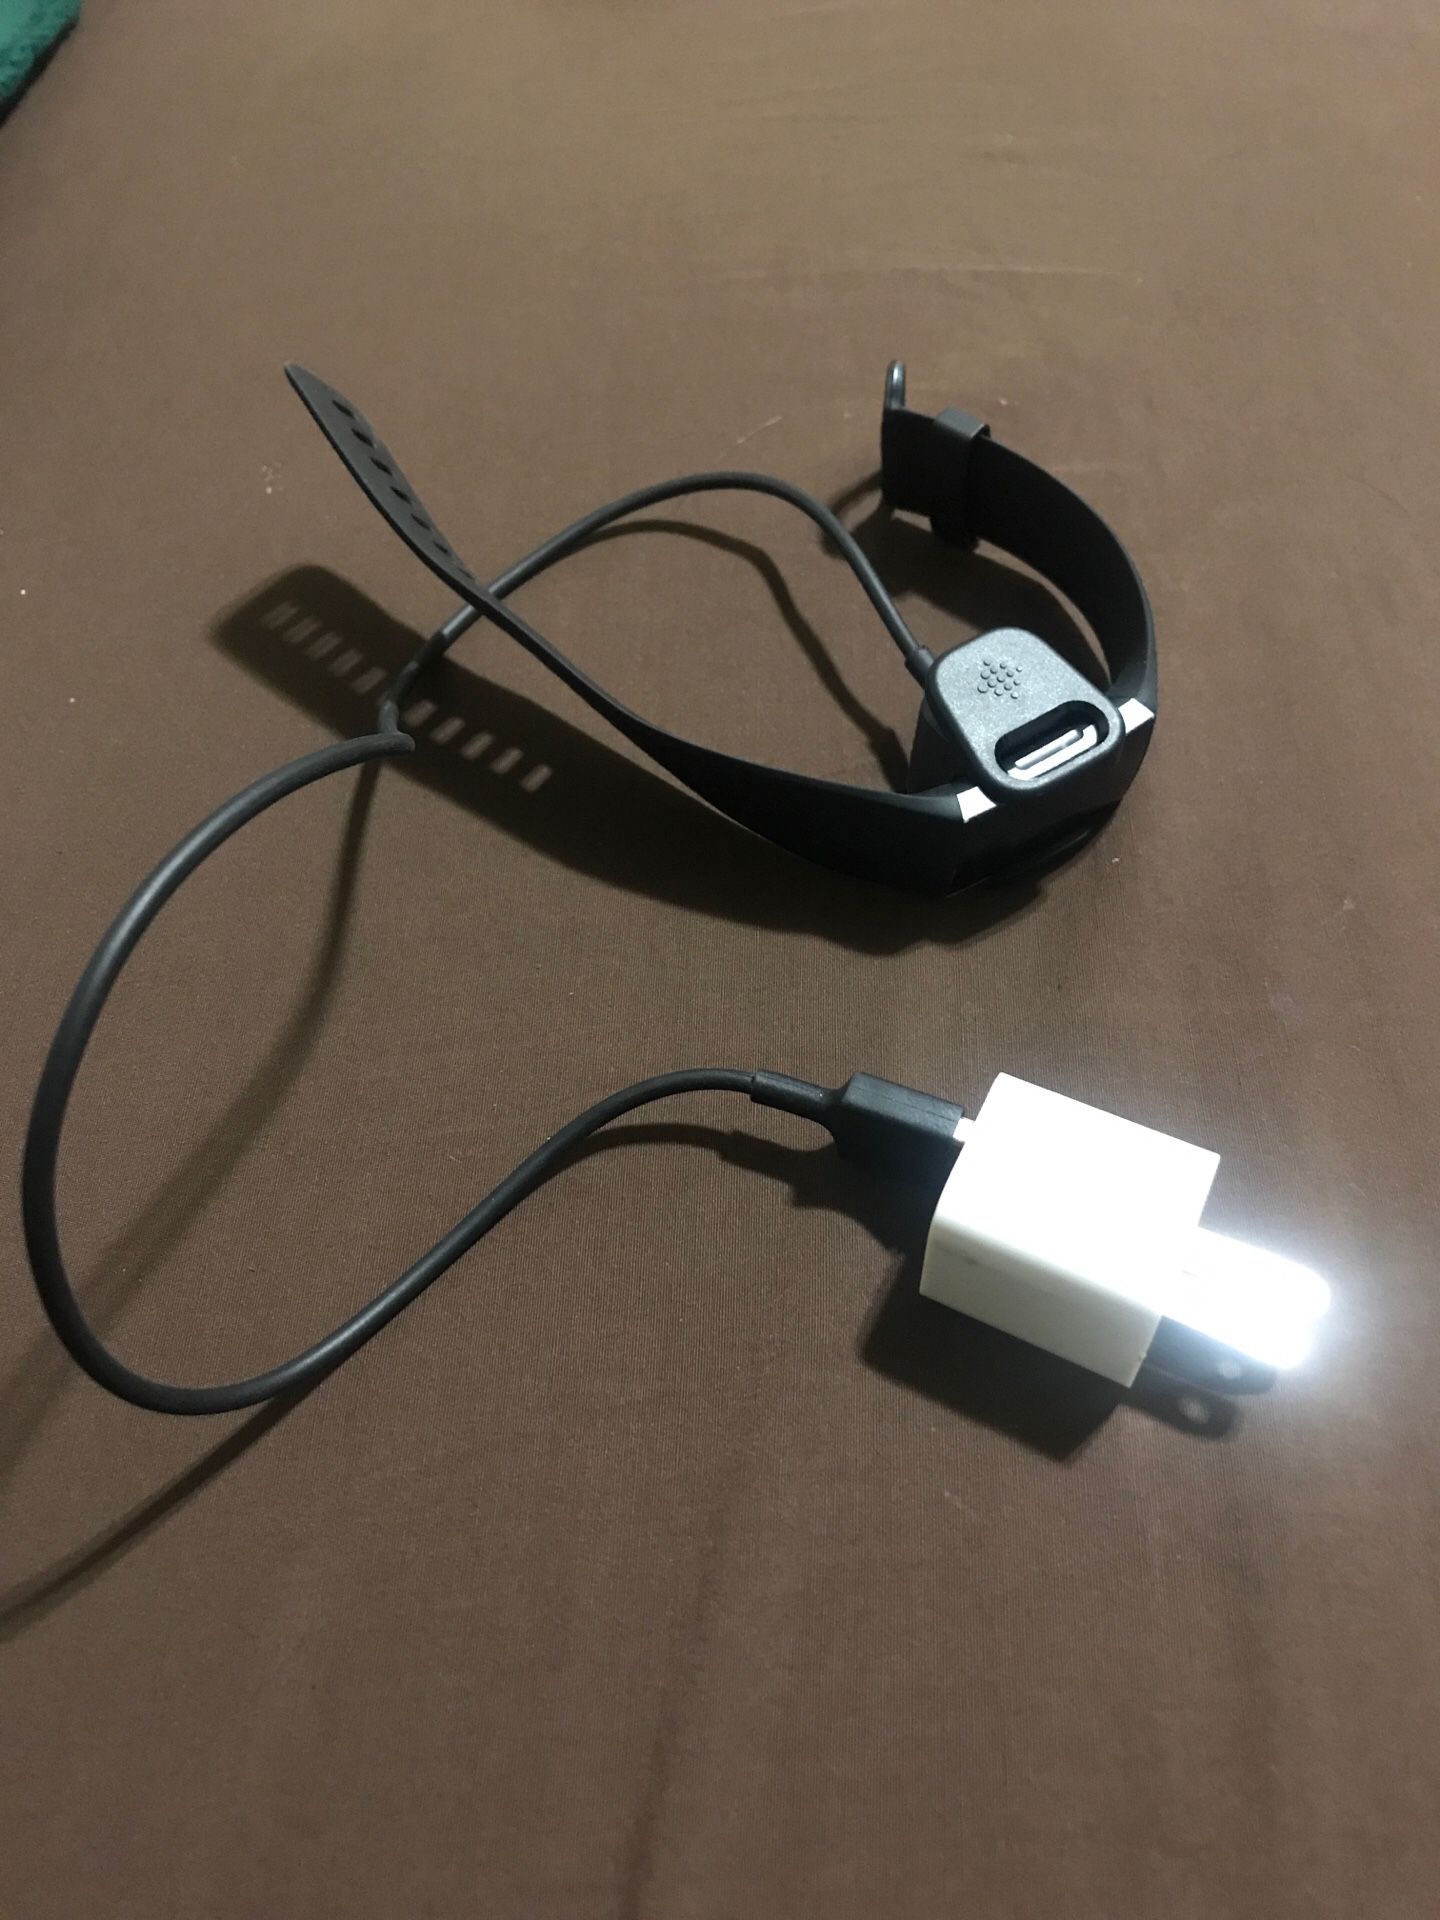 Fitbit Charge 3 barely used and working perfectly